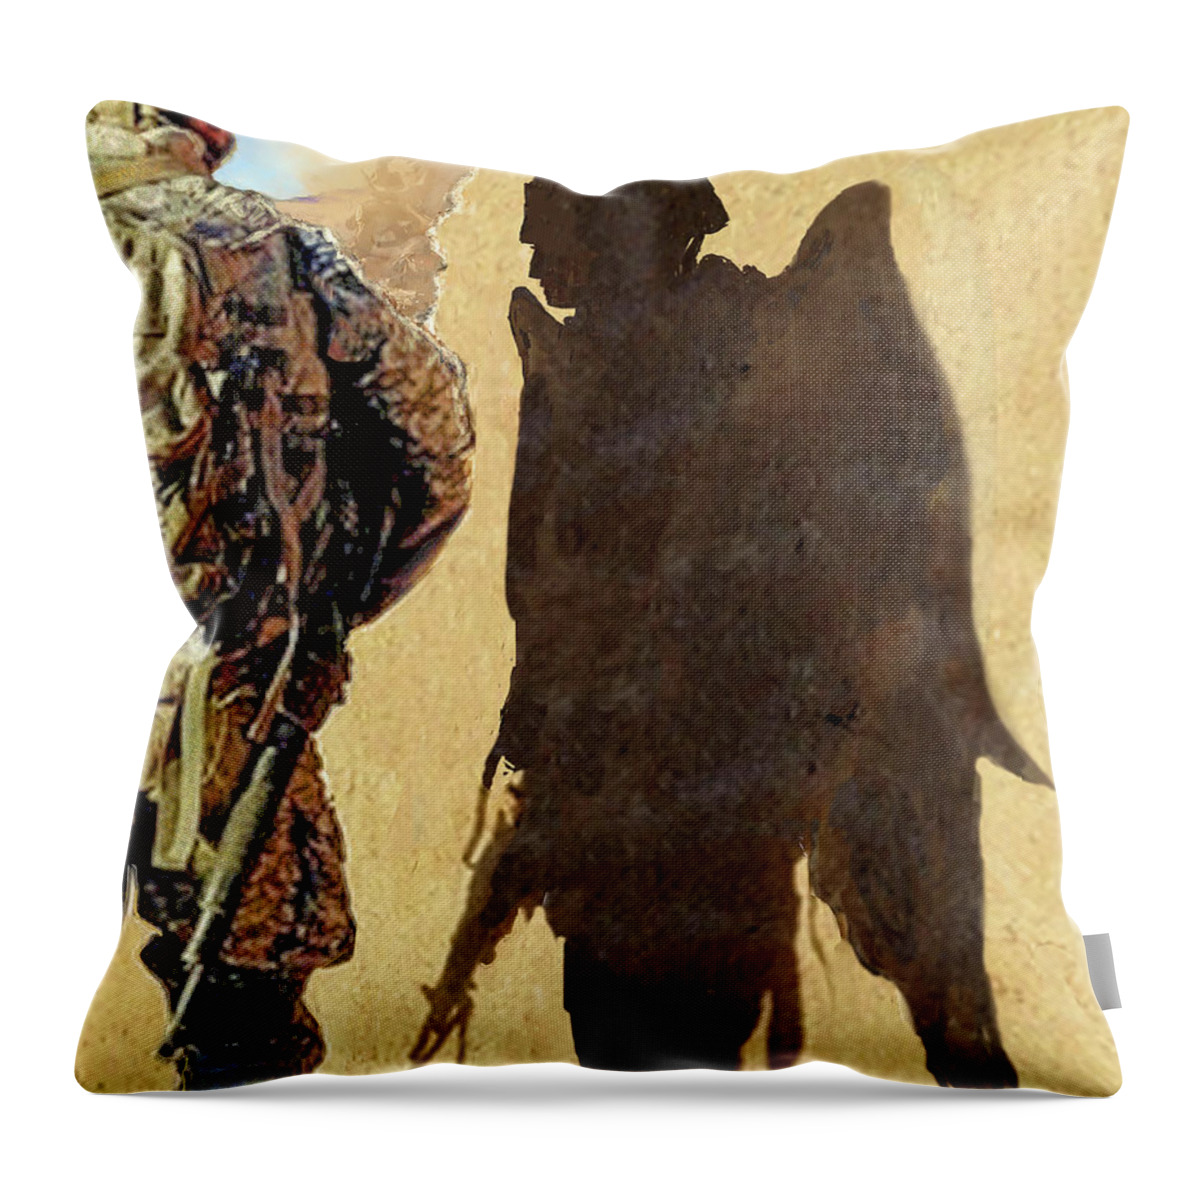 Military Art Throw Pillow featuring the painting Angel Waiting by Todd Krasovetz